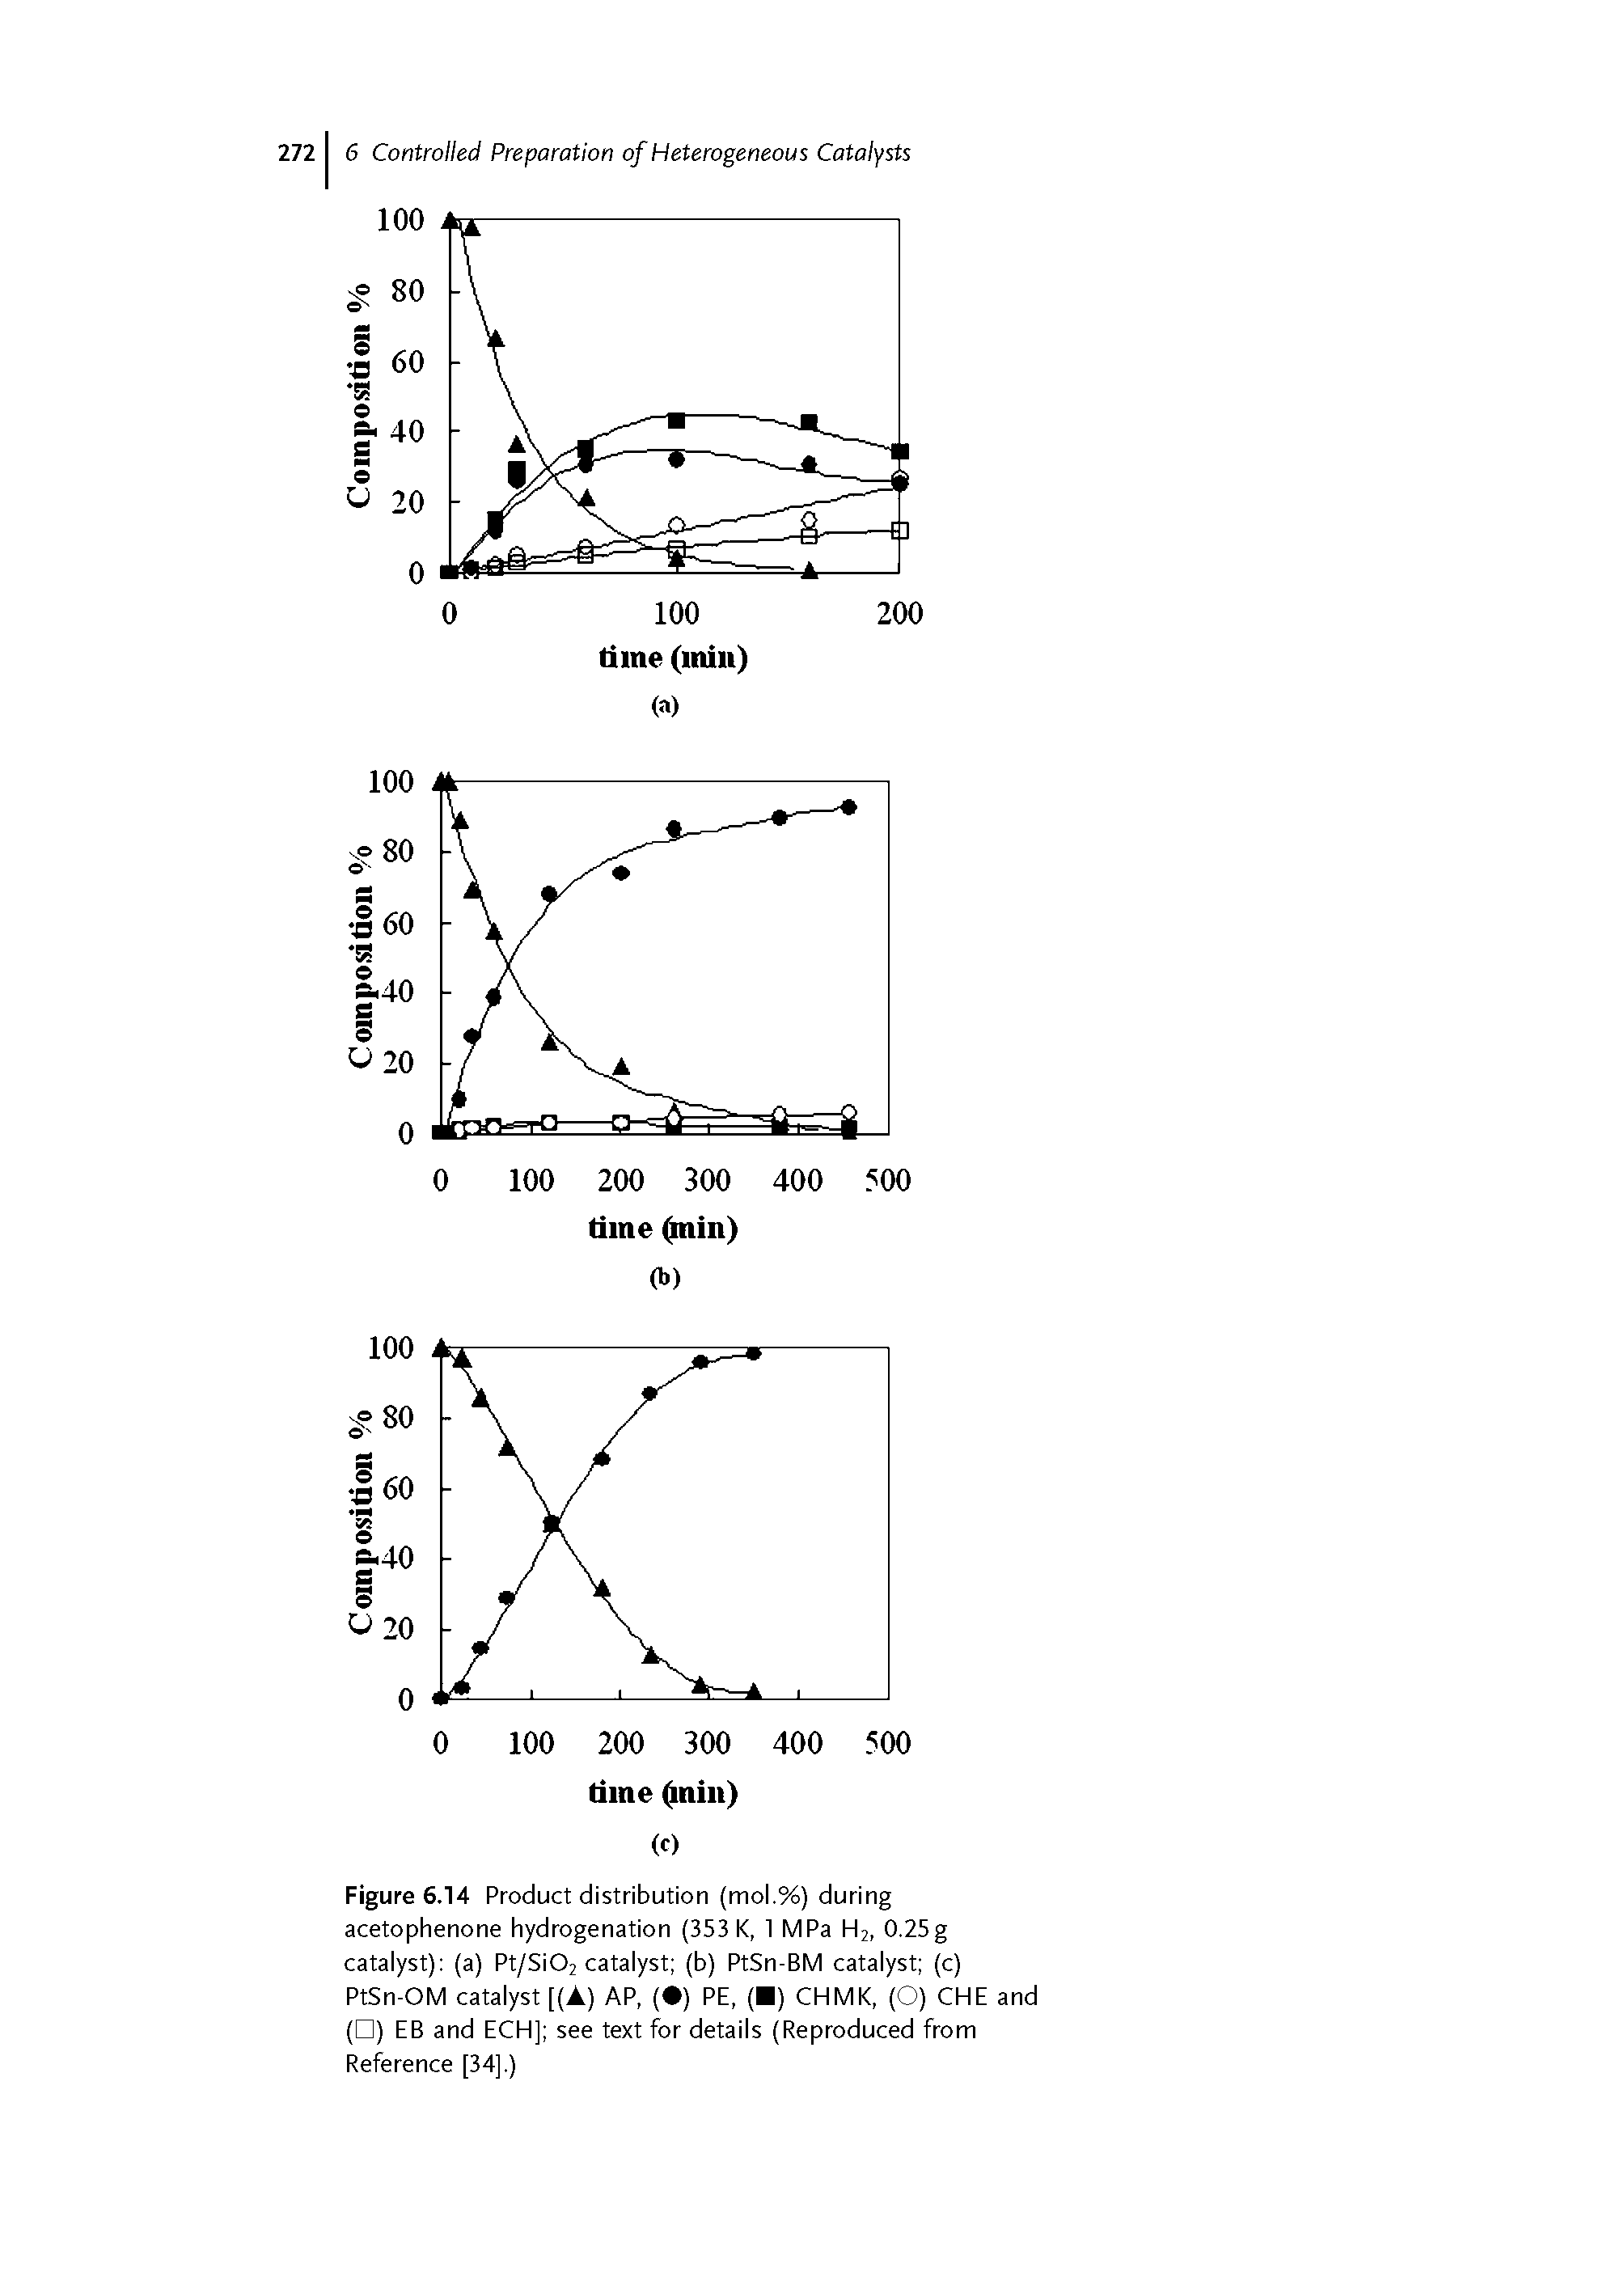 Figure 6.14 Product distribution (mol.%) during acetophenone hydrogenation (353 K, 1 MPa H2, 0.25g catalyst) (a) Pt/Si02 catalyst (b) PtSn-BM catalyst (c) PtSn-OM catalyst [(A) AP, ( ) PE, ( ) CHMK, (O) CHE and ( ) EB and ECH] see text for details (Reproduced from Reference [34].)...